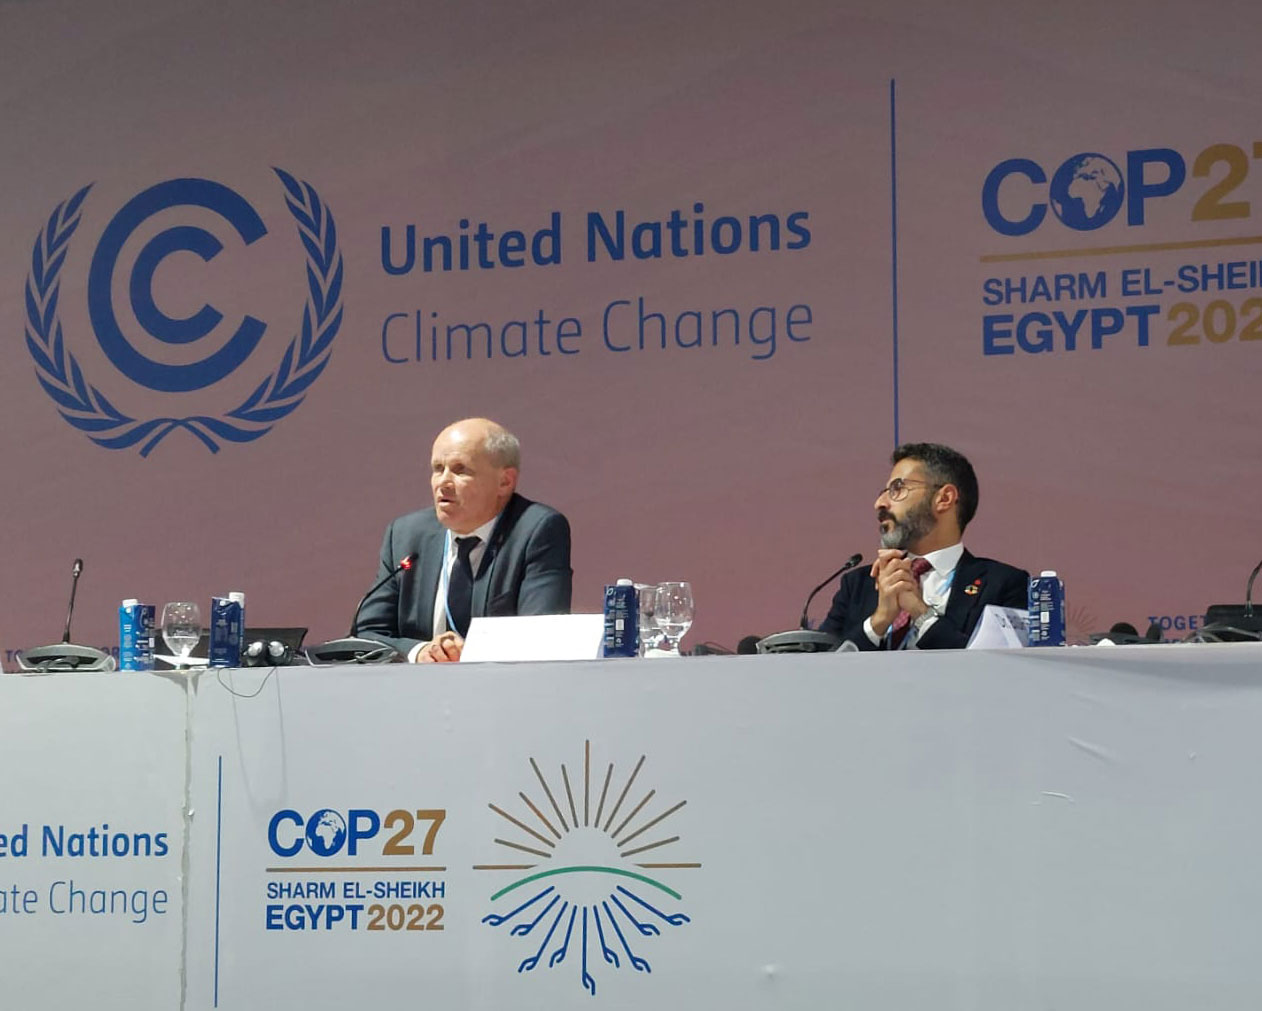 SIWI Director Torgny Holmgren on stage during COP27 in Egypt.